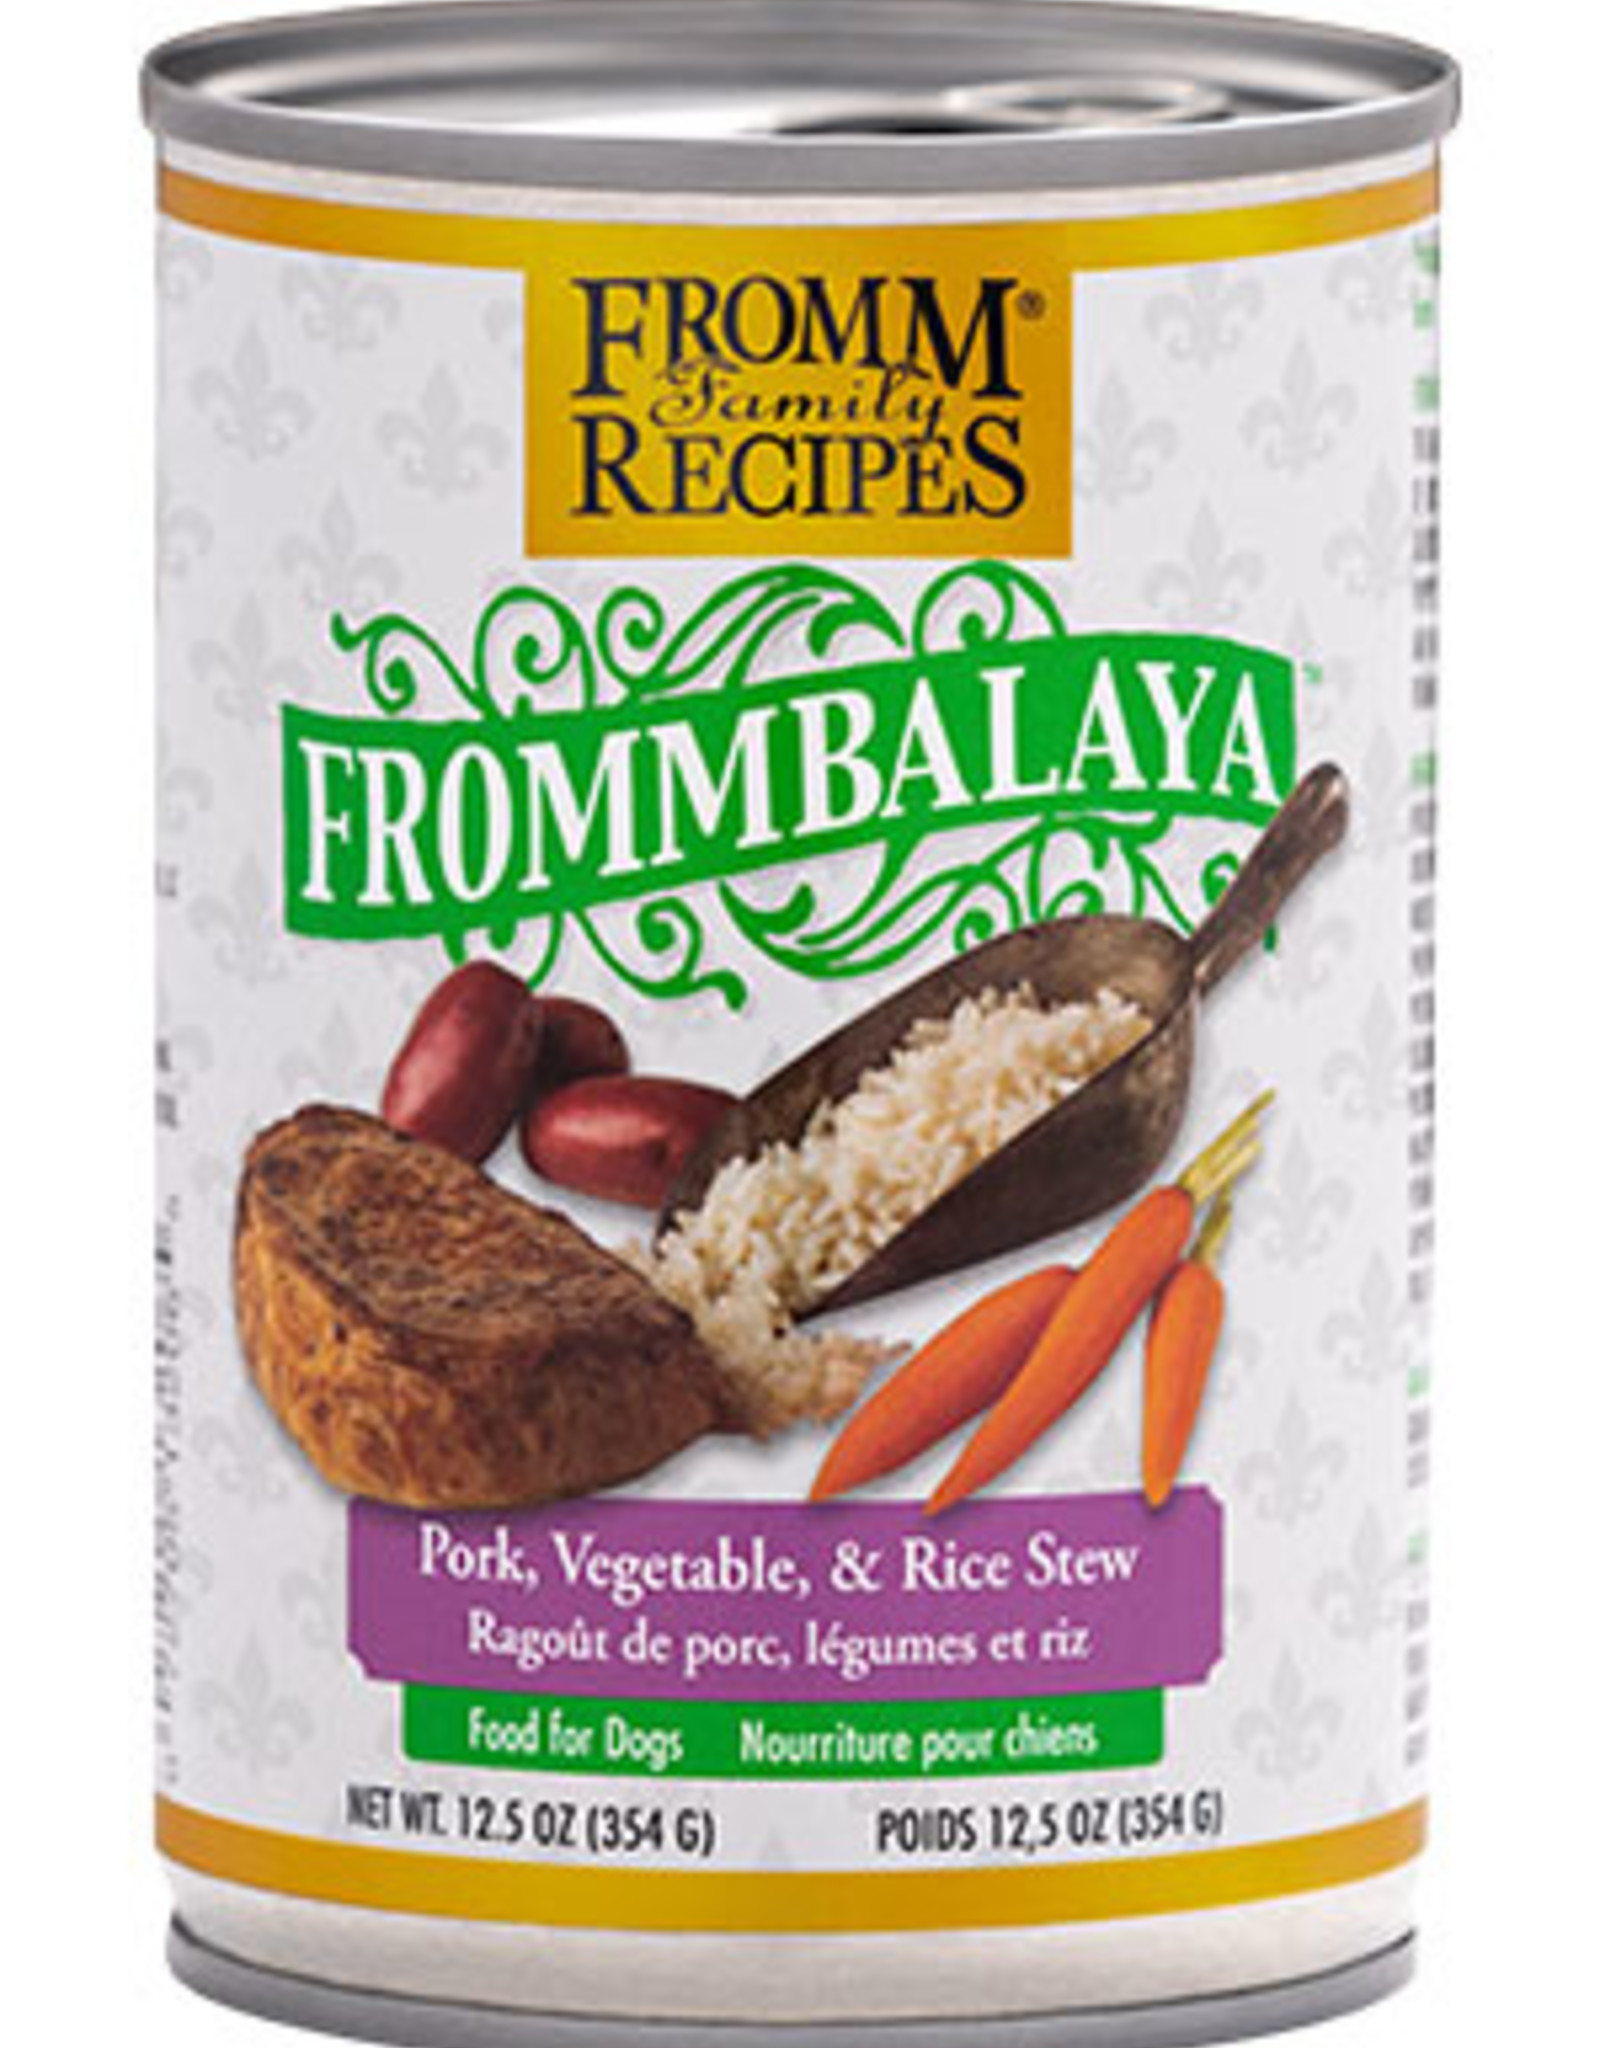 FROMM FAMILY FOODS LLC FROMM DOG FROMMBALAYA PORK & RICE STEW CAN 12.5OZ CASE OF 12